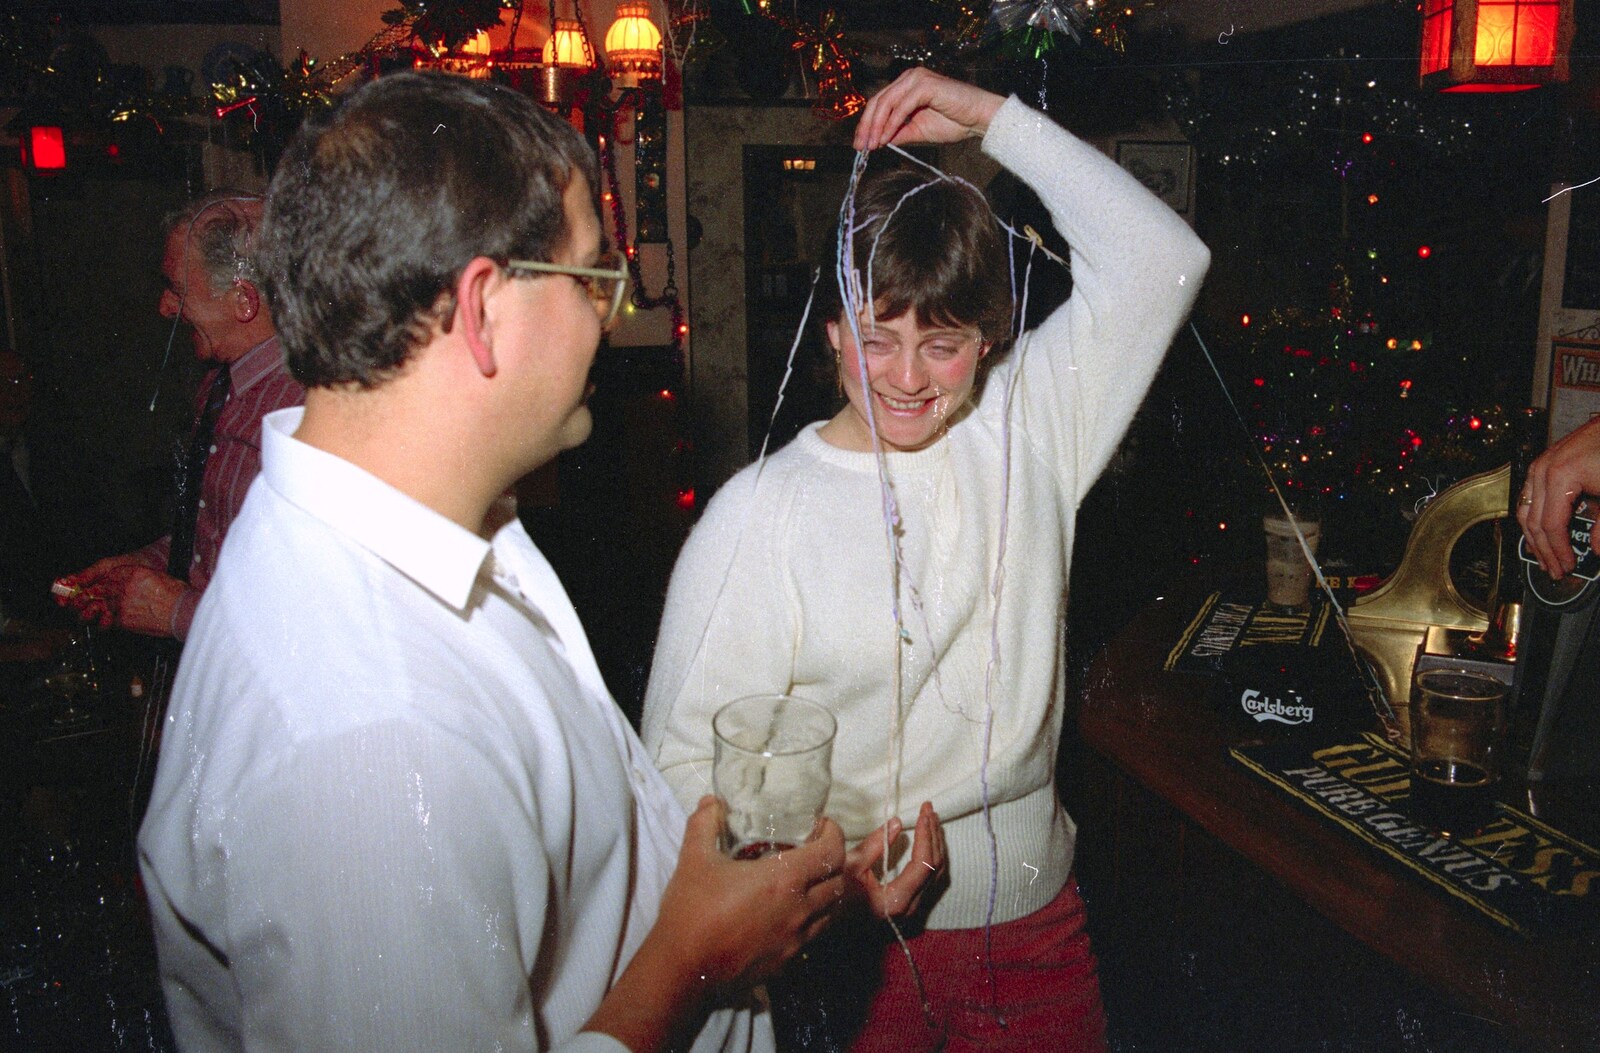 Roger and Pippa, who's covered in silly string from New Year's Eve at the Swan Inn, Brome, Suffolk - 31st December 1991